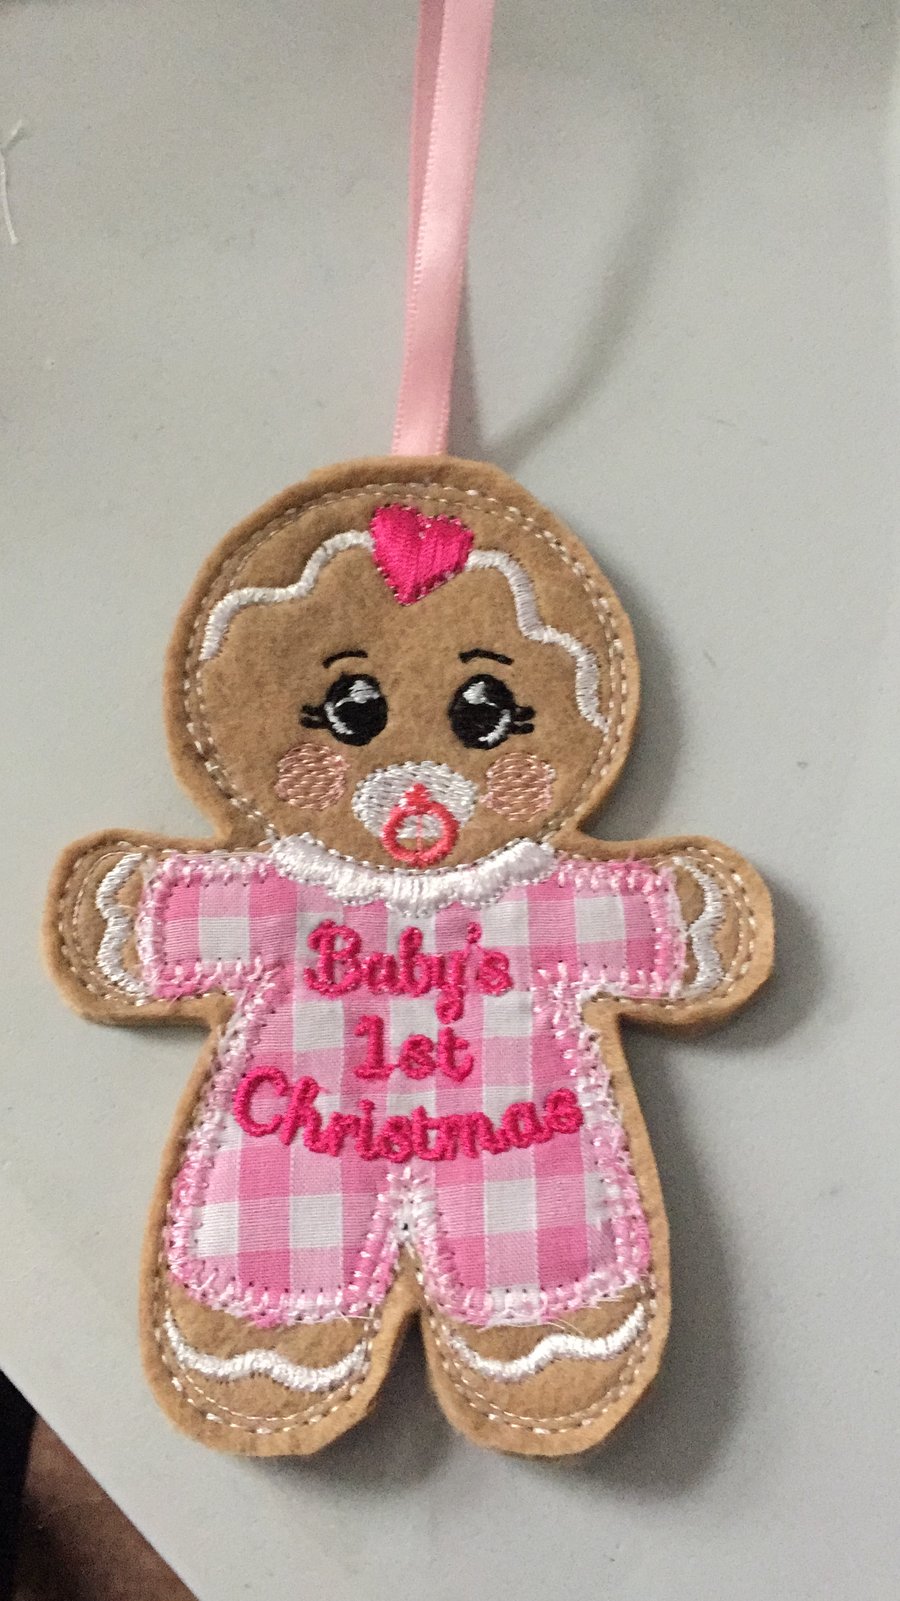 Baby’s 1st Christmas decoration. Girl . Pink